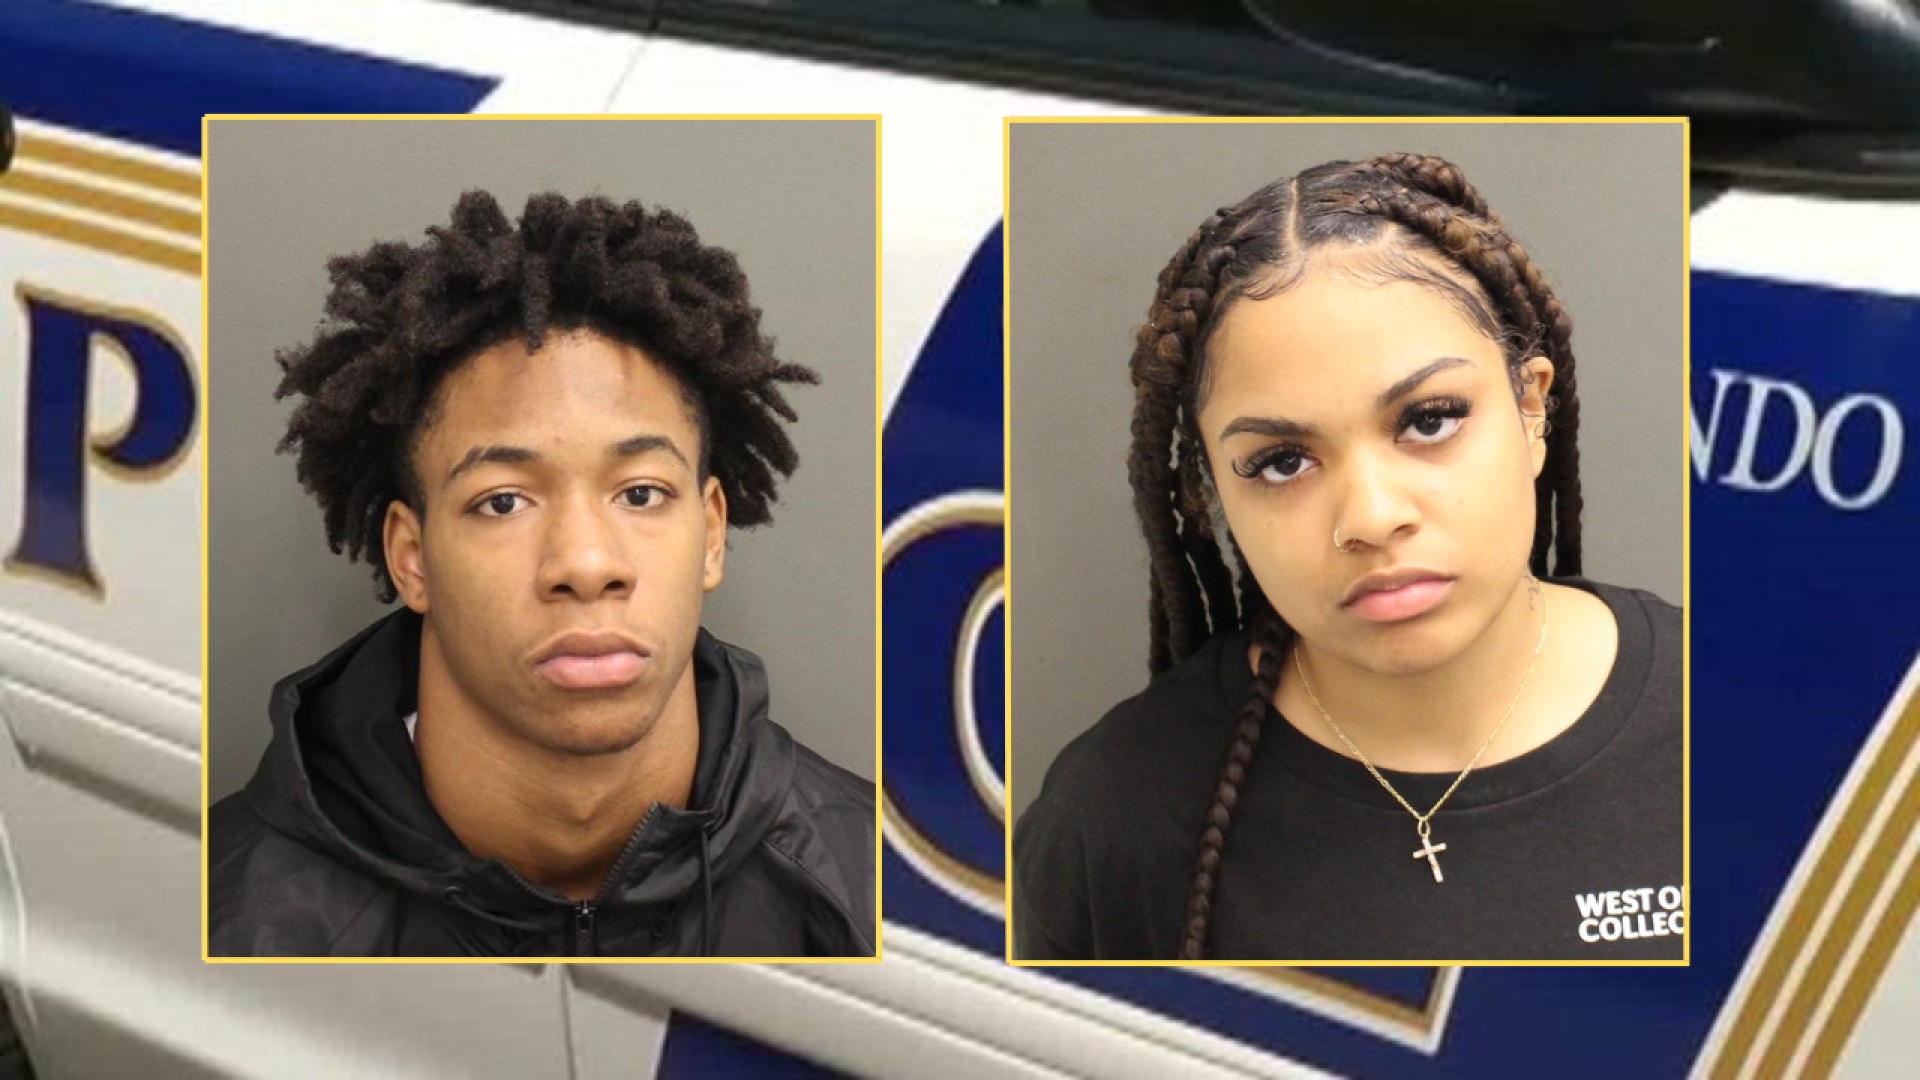 University of Central Florida College Football Player and Female Accomplice Arrested for Violent Home Invasion at Luxury Orlando Condo